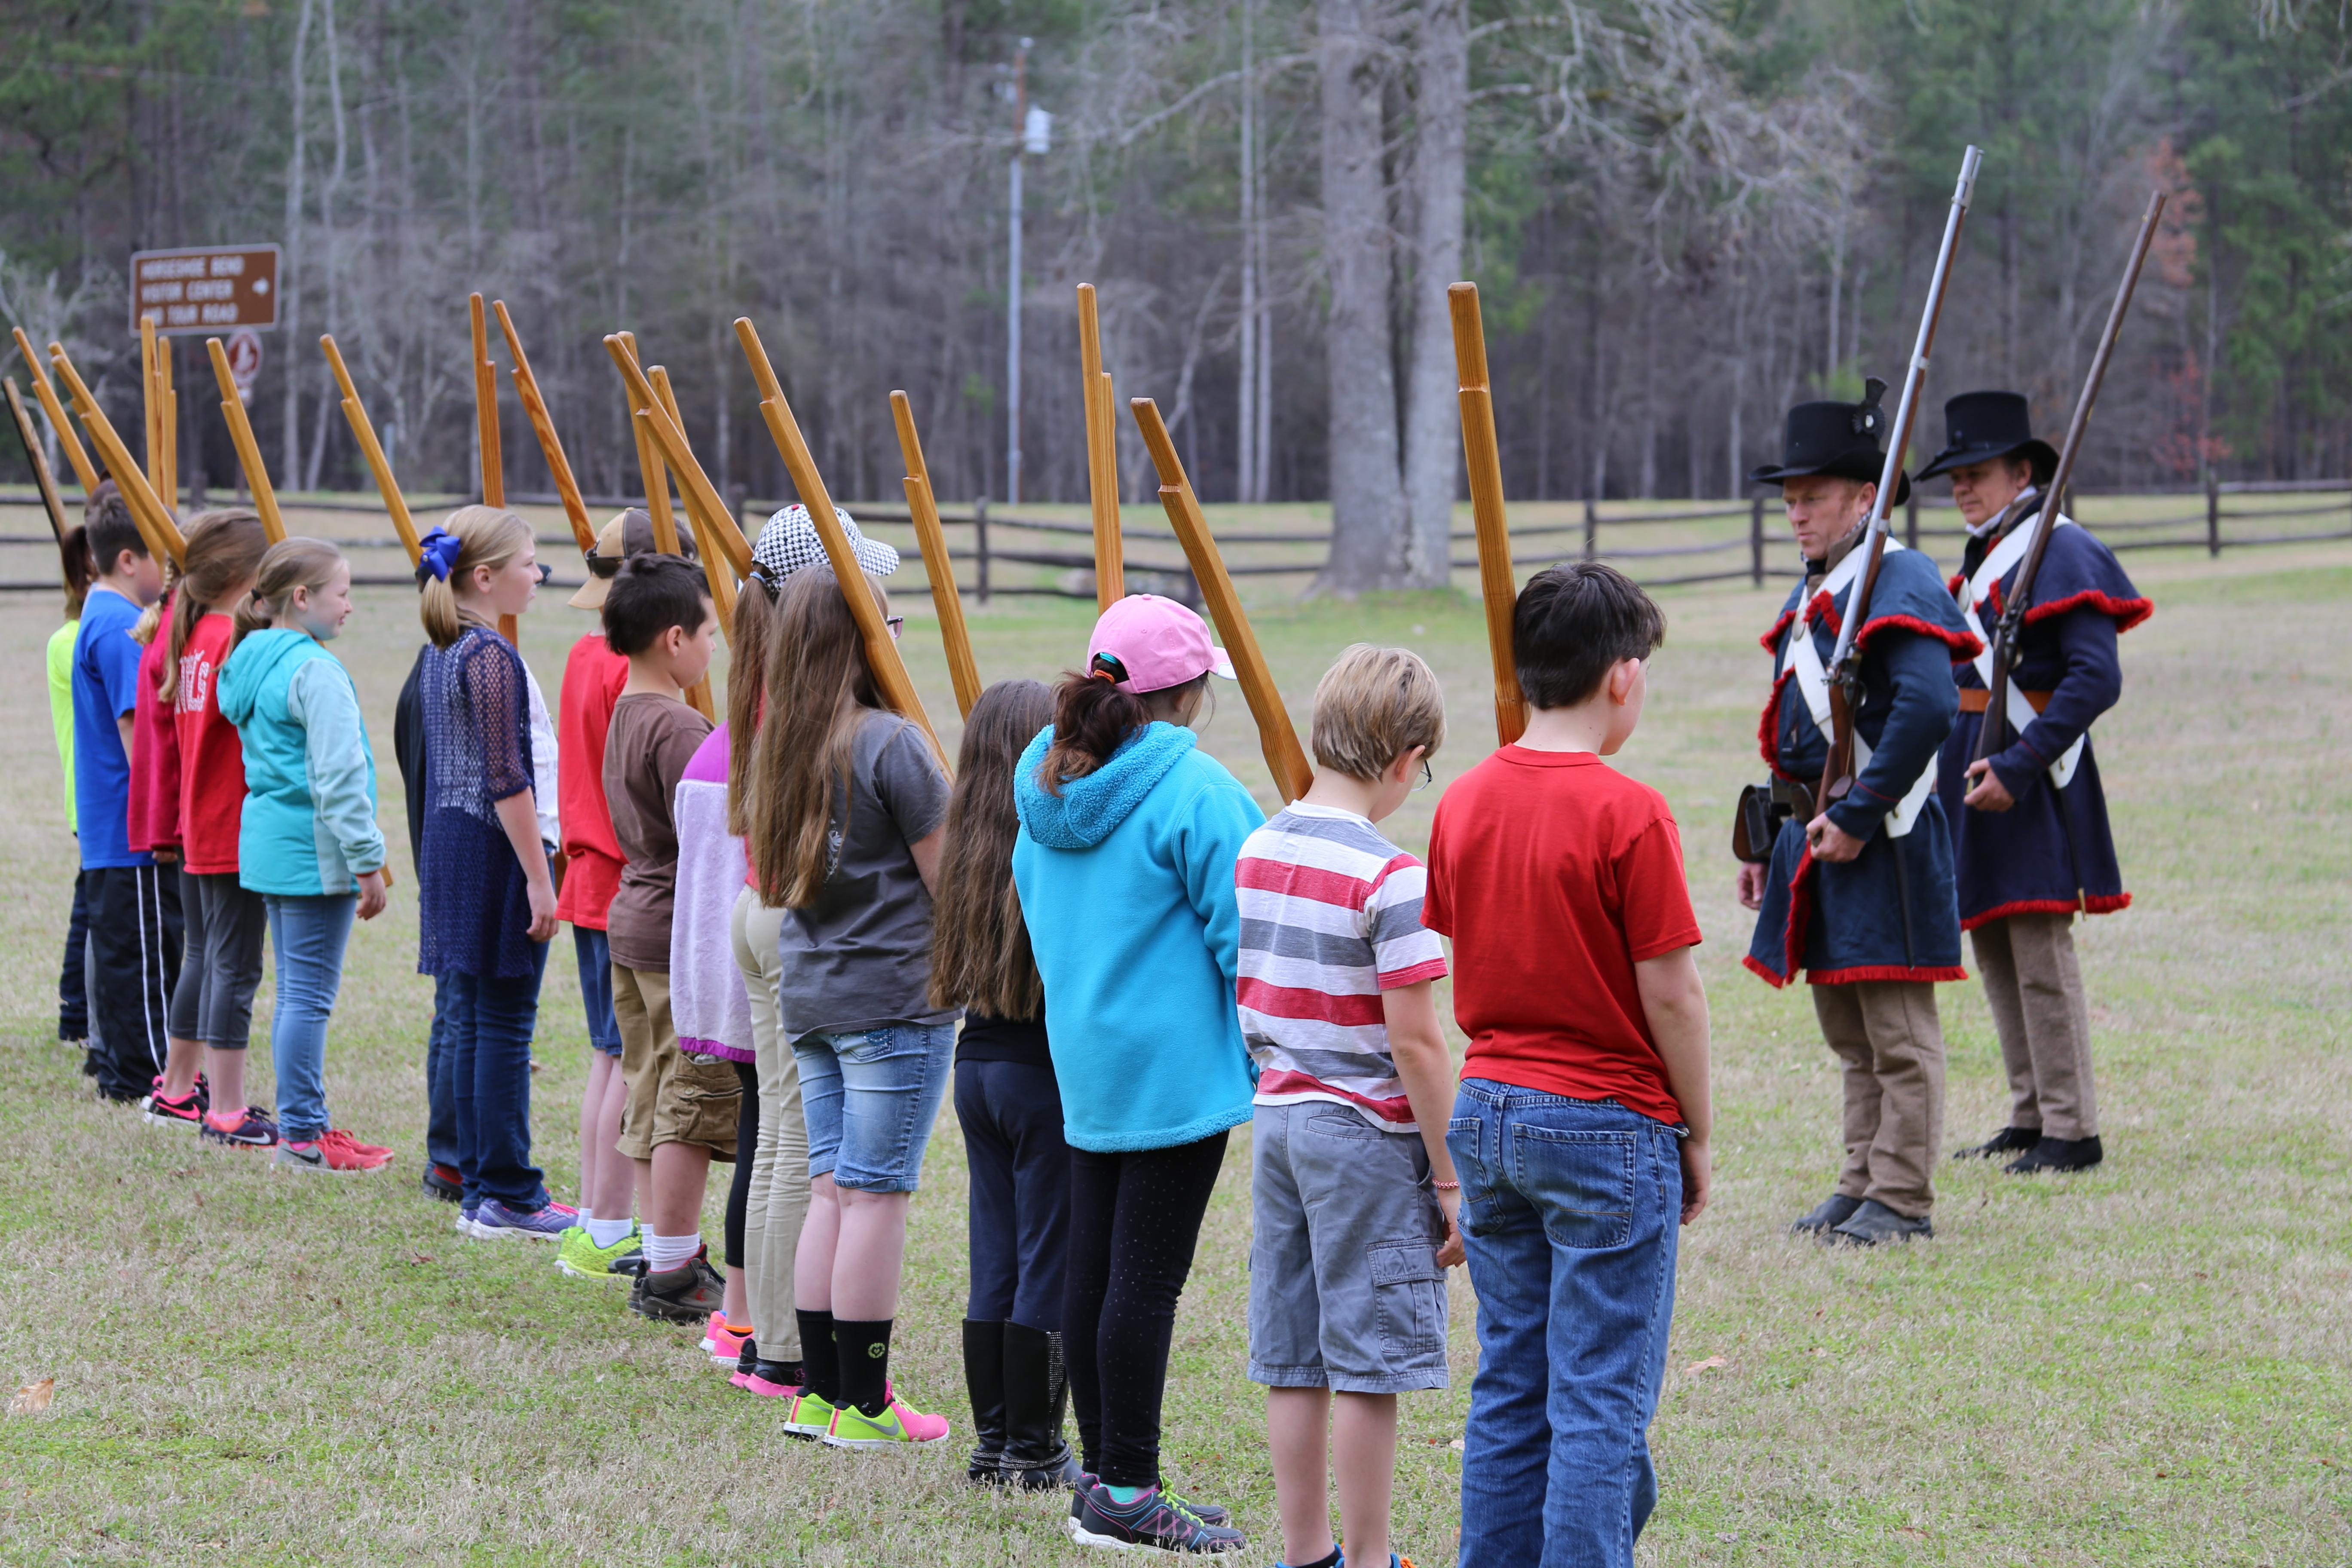 Two rangers dressed in 1812 clothing face a line of children with wooden muskets